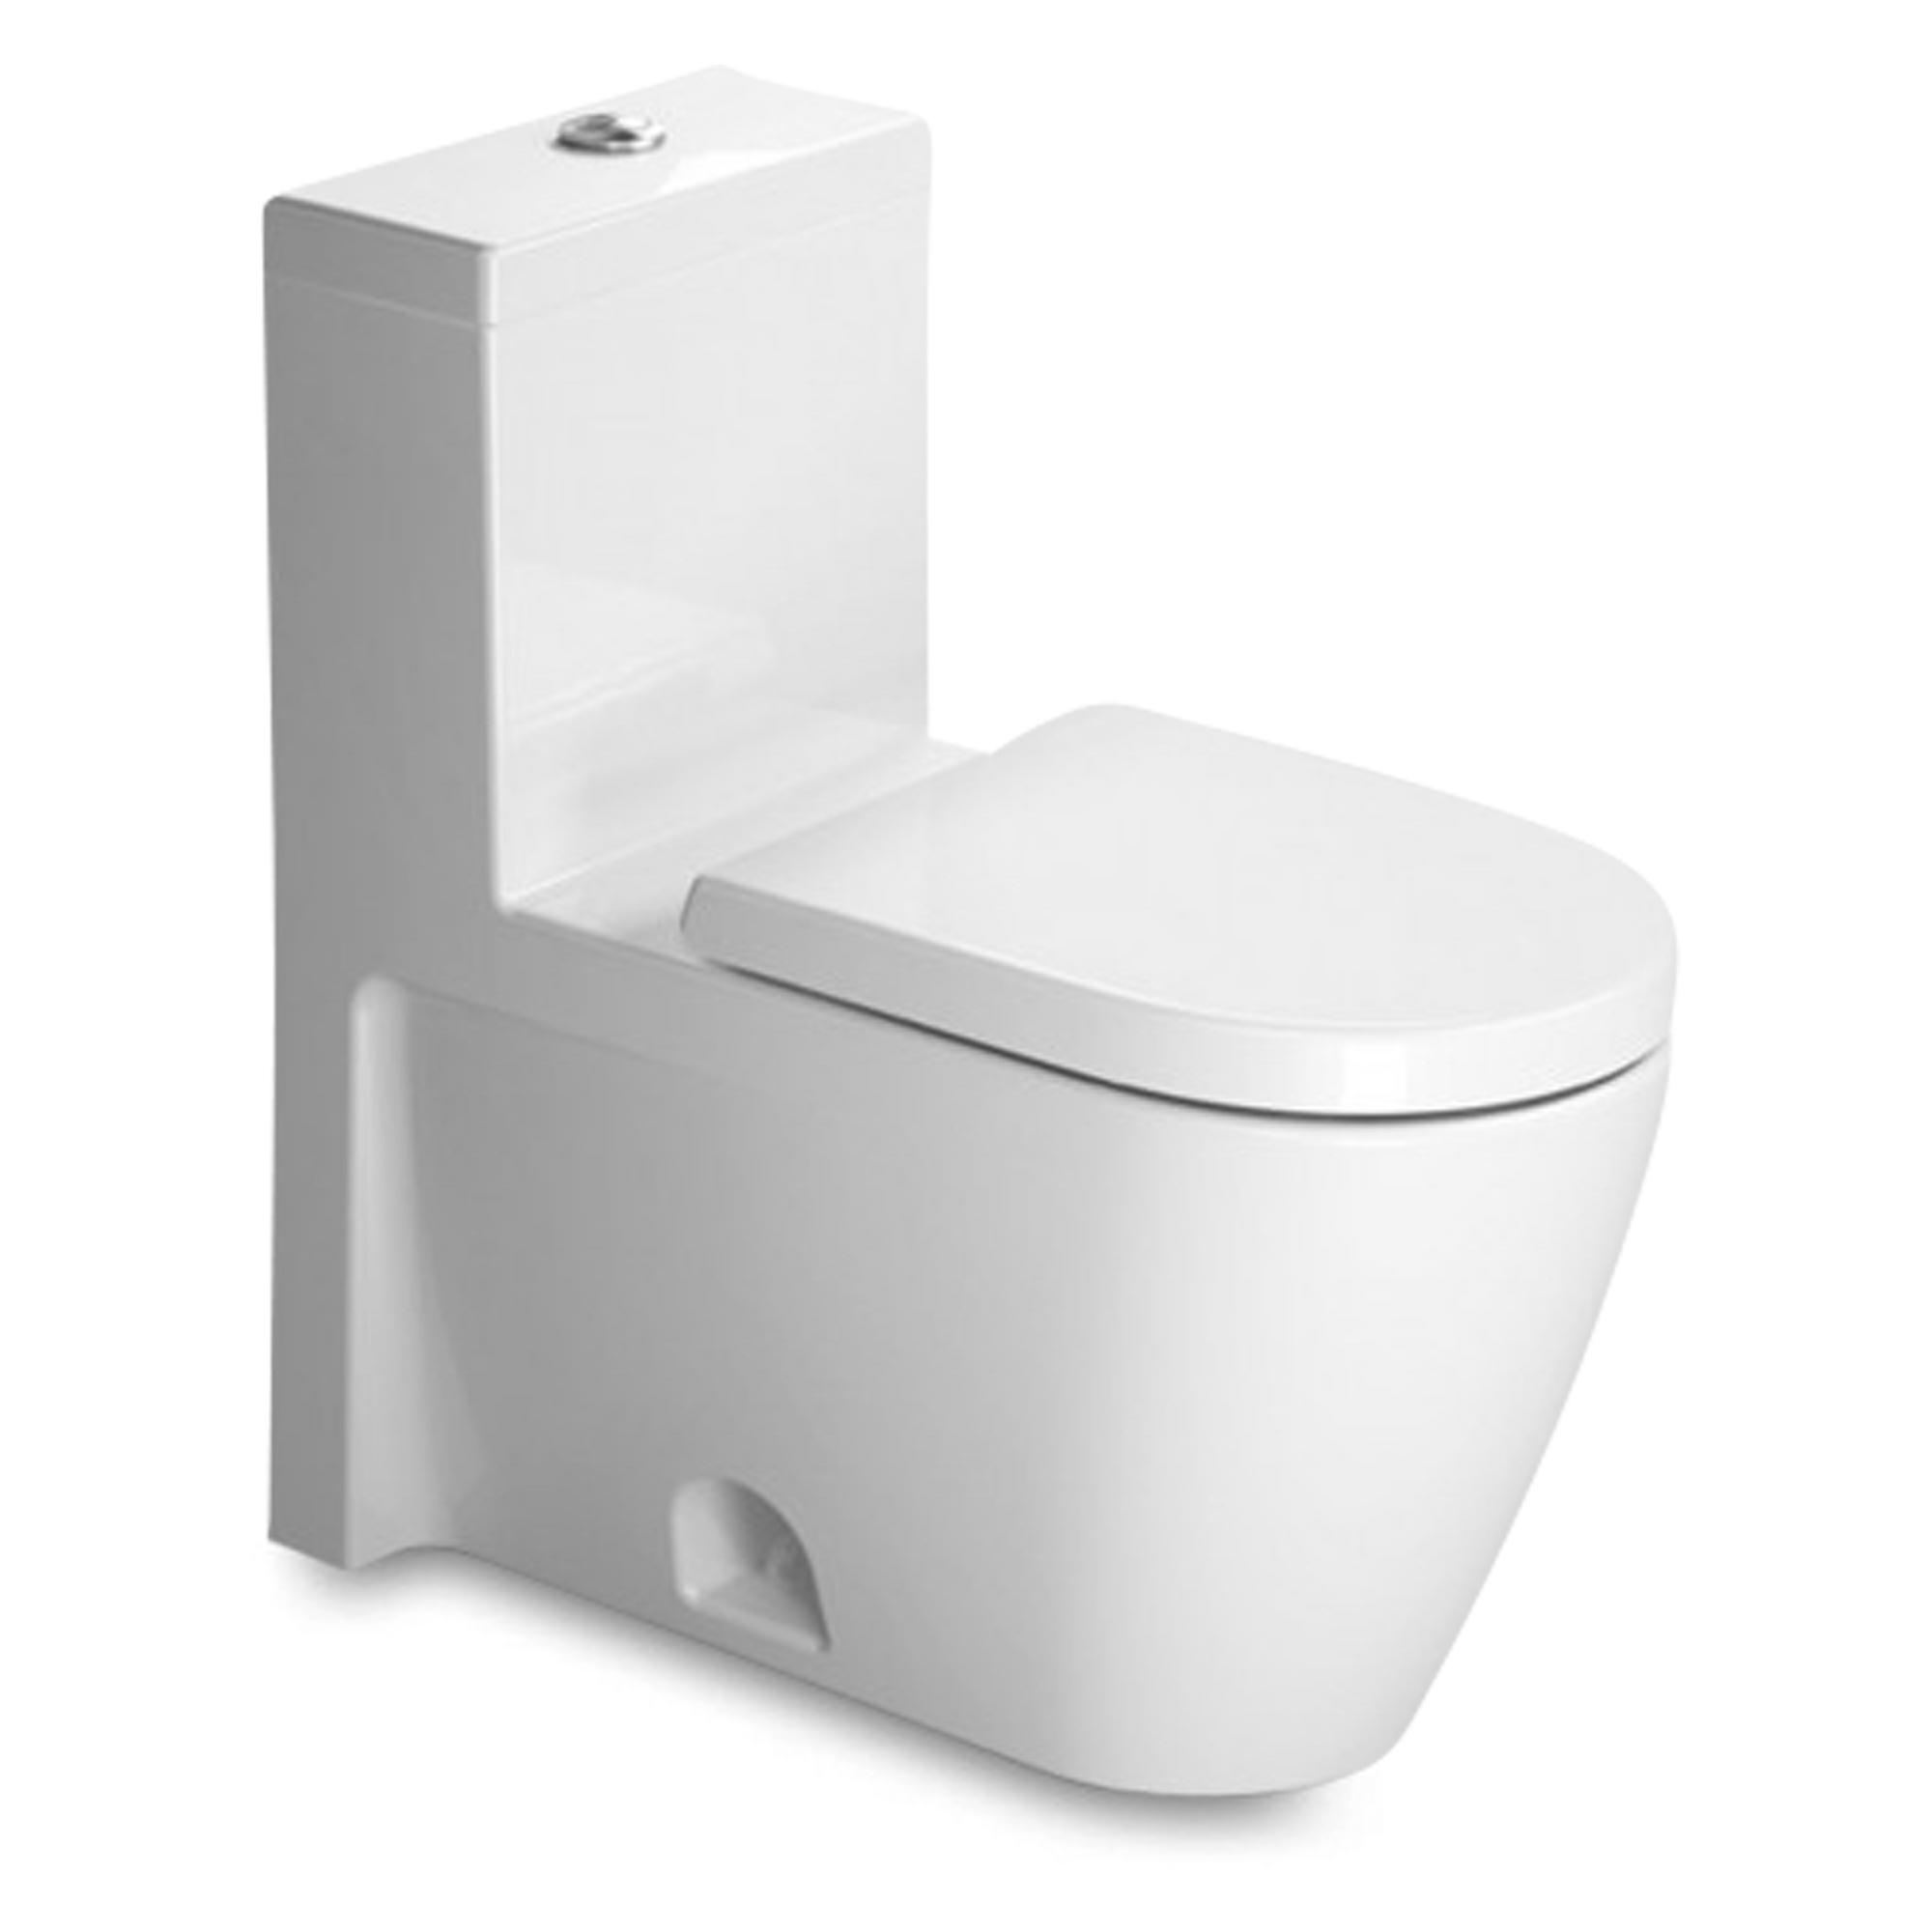 A modern style one-piece toilet with SoftClose seat.